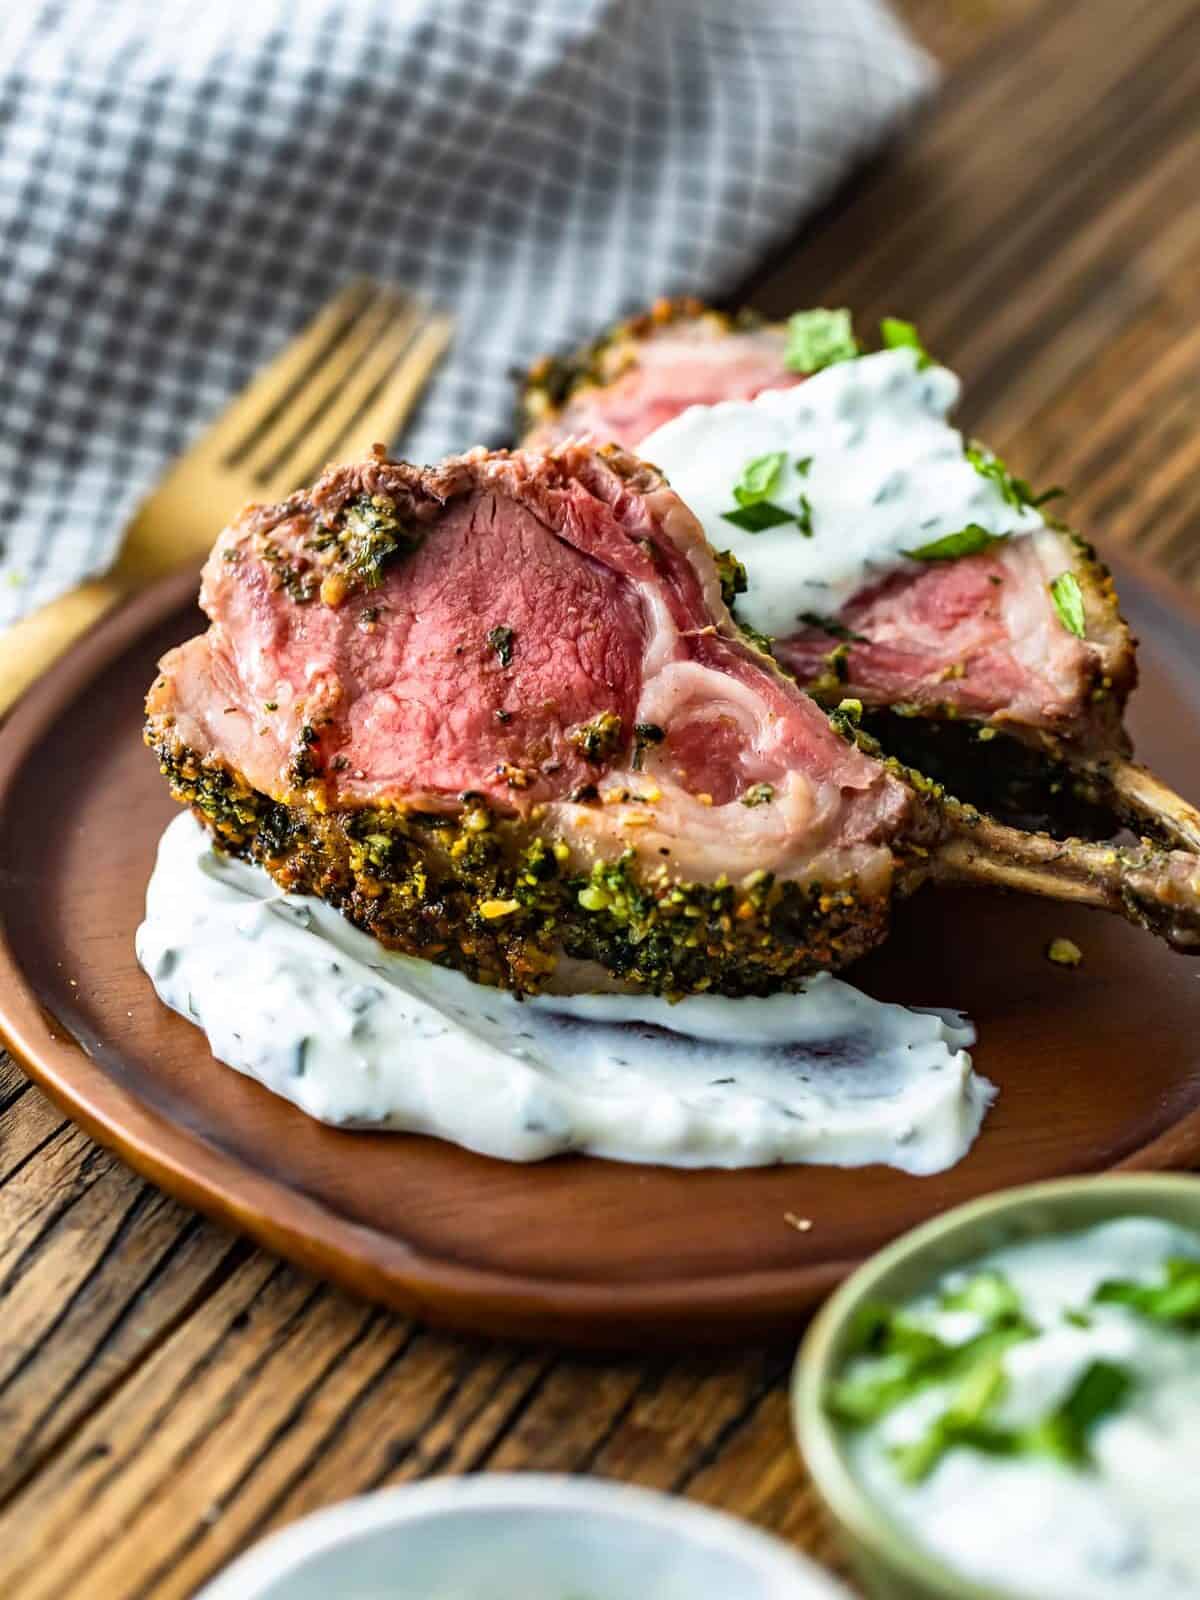 https://www.thecookierookie.com/wp-content/uploads/2023/04/herb-crusted-rack-of-lamb-recipe-8-of-8-edited.jpg